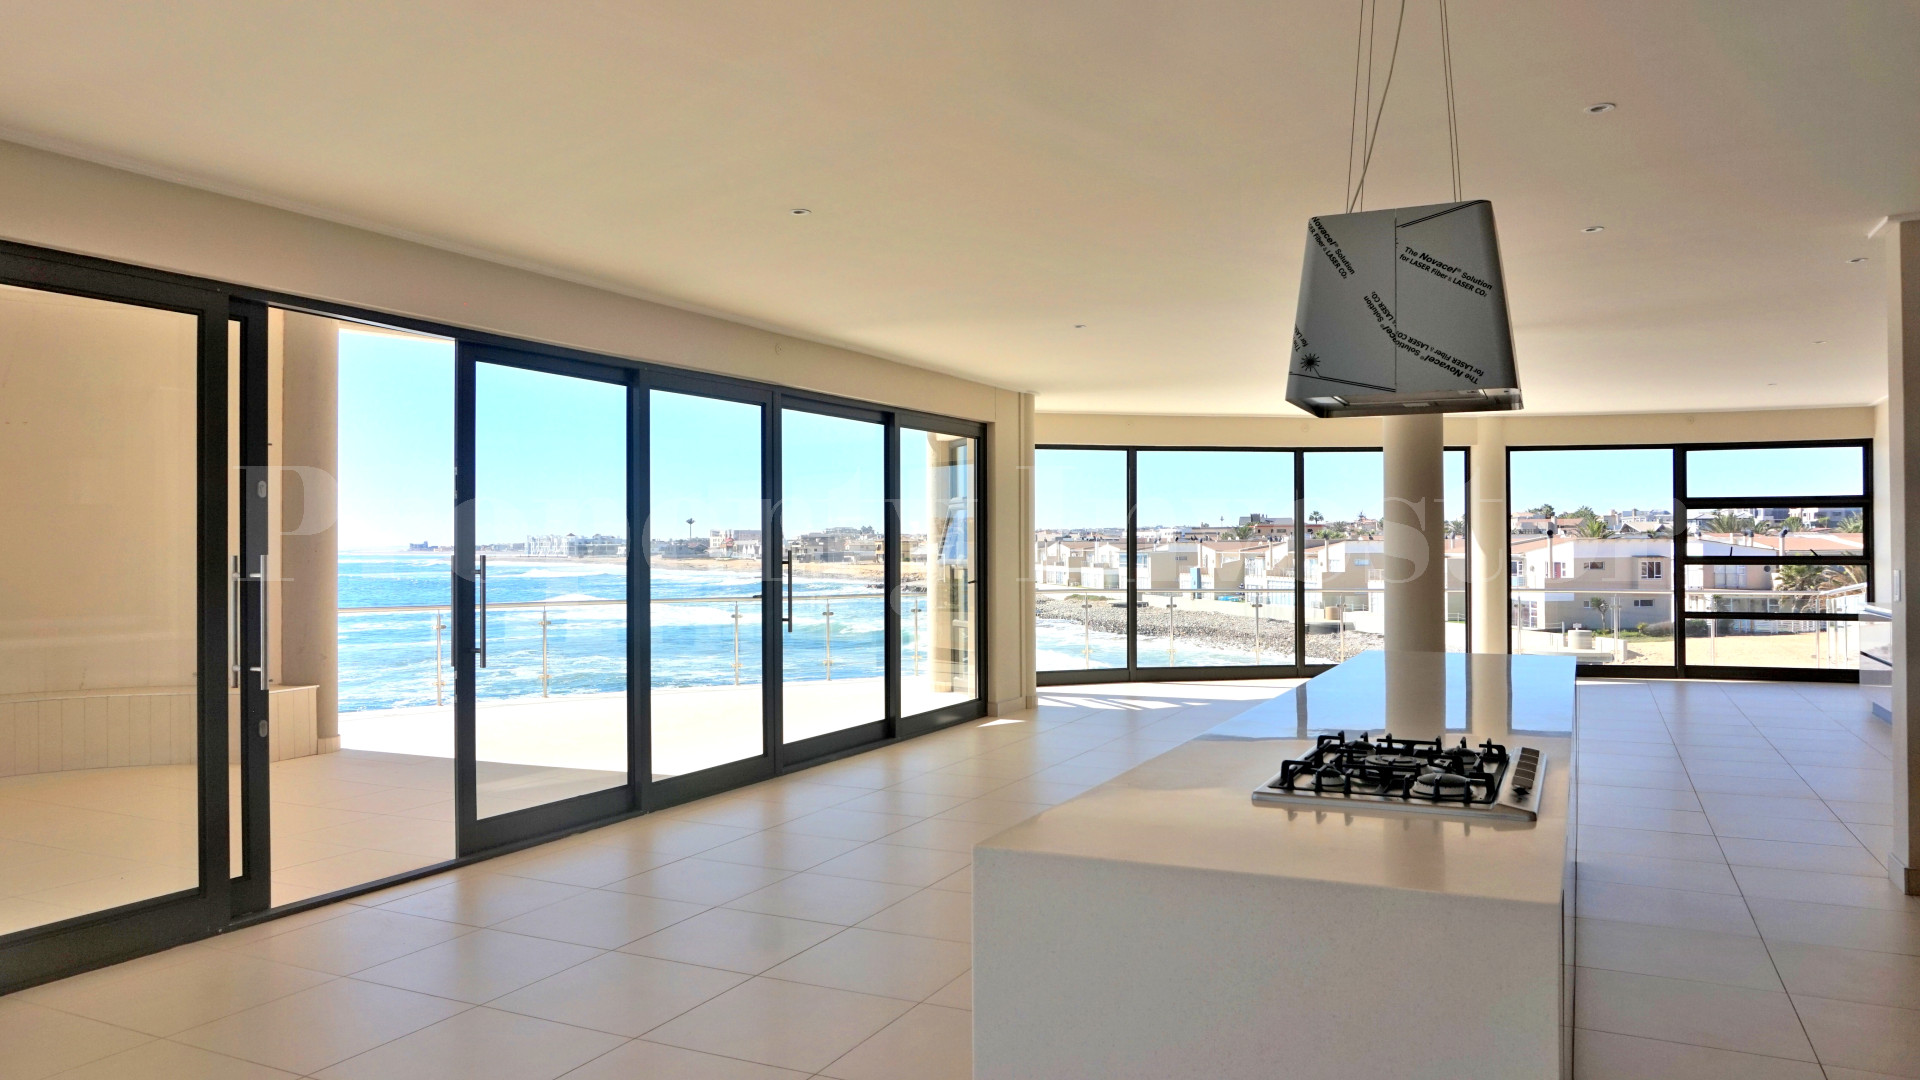 Exclusive 4 Bedroom Luxury Waterfront Penthouse with Spectacular Ocean Views & Balconies for Sale in Swakopmund, Namibia